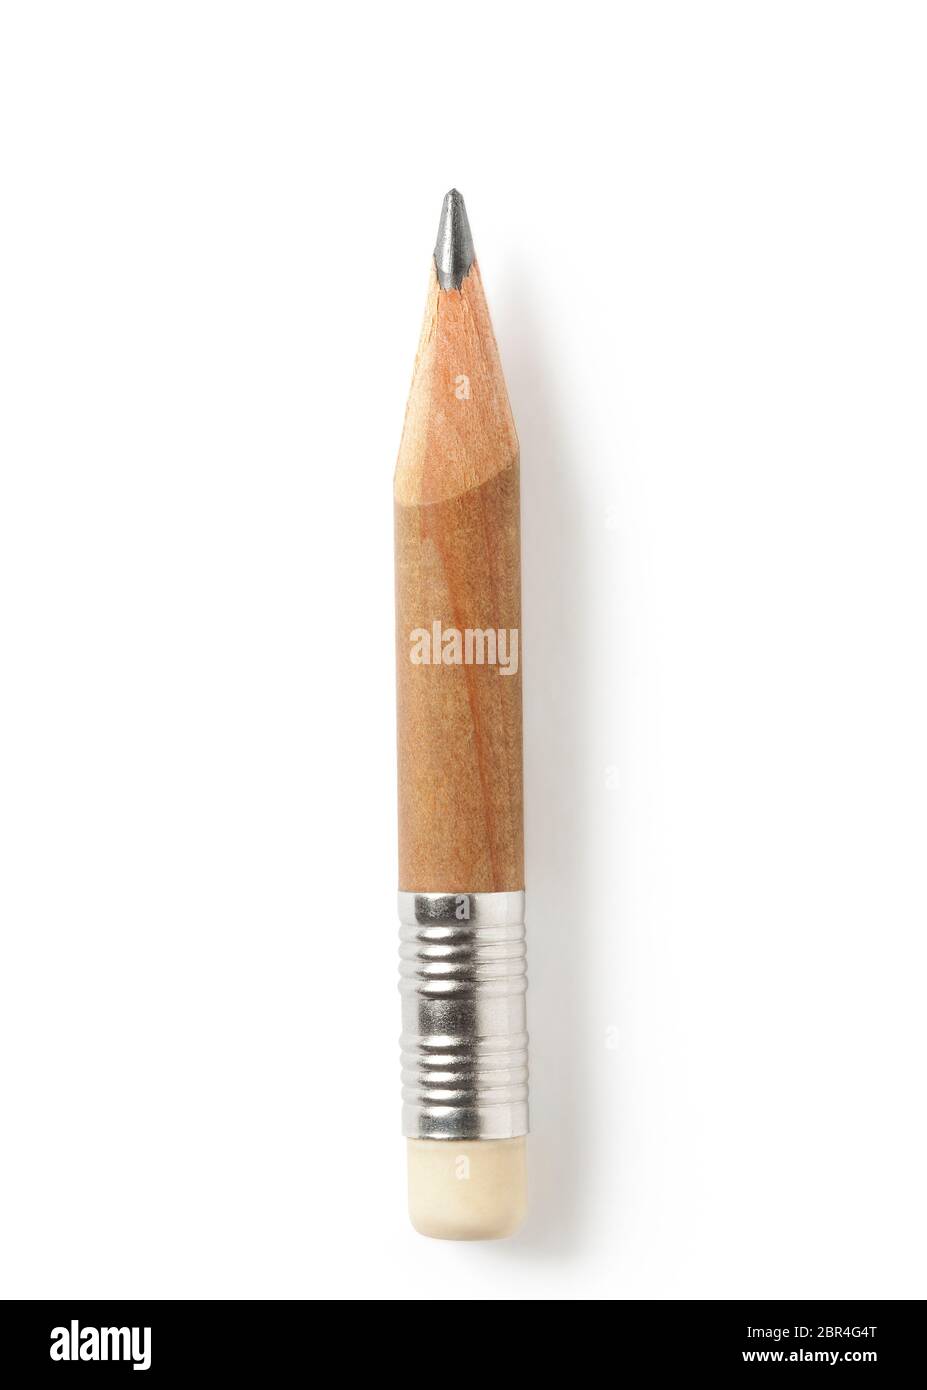 worn-pencil-round-shape-very-short-pencil-against-white-background-with-a-soft-shadow-clipping-path-2BR4G4T.jpg